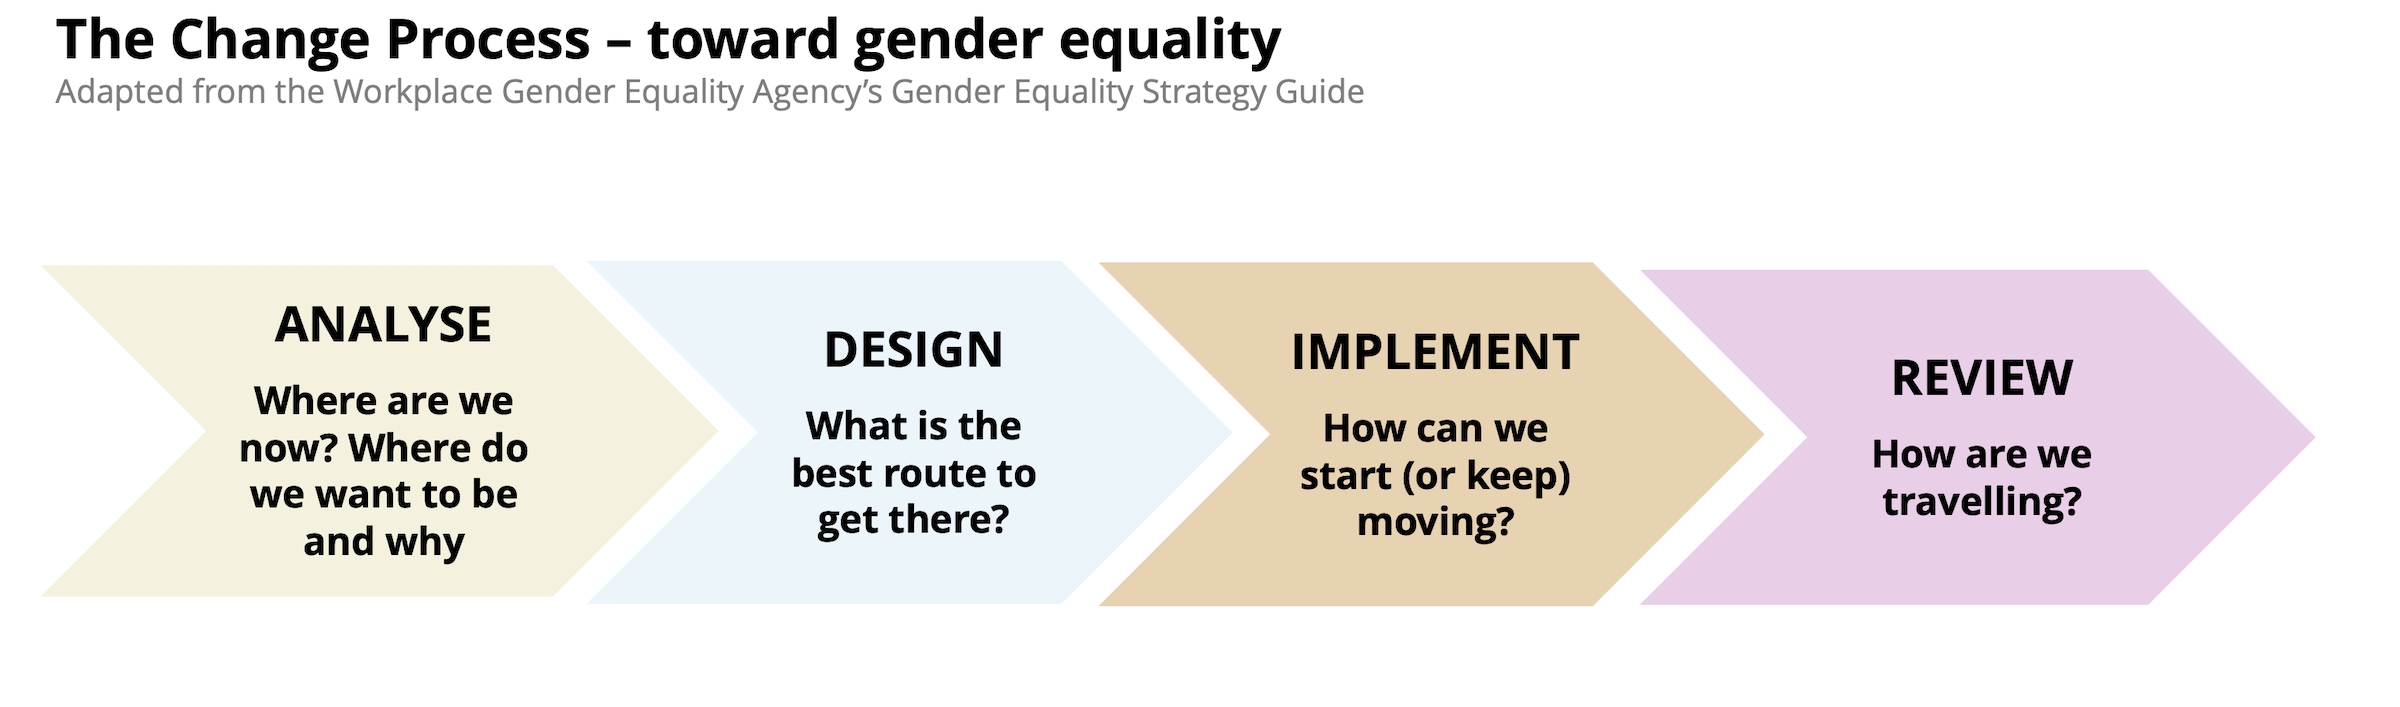 Change Process for Gender Equality graphic